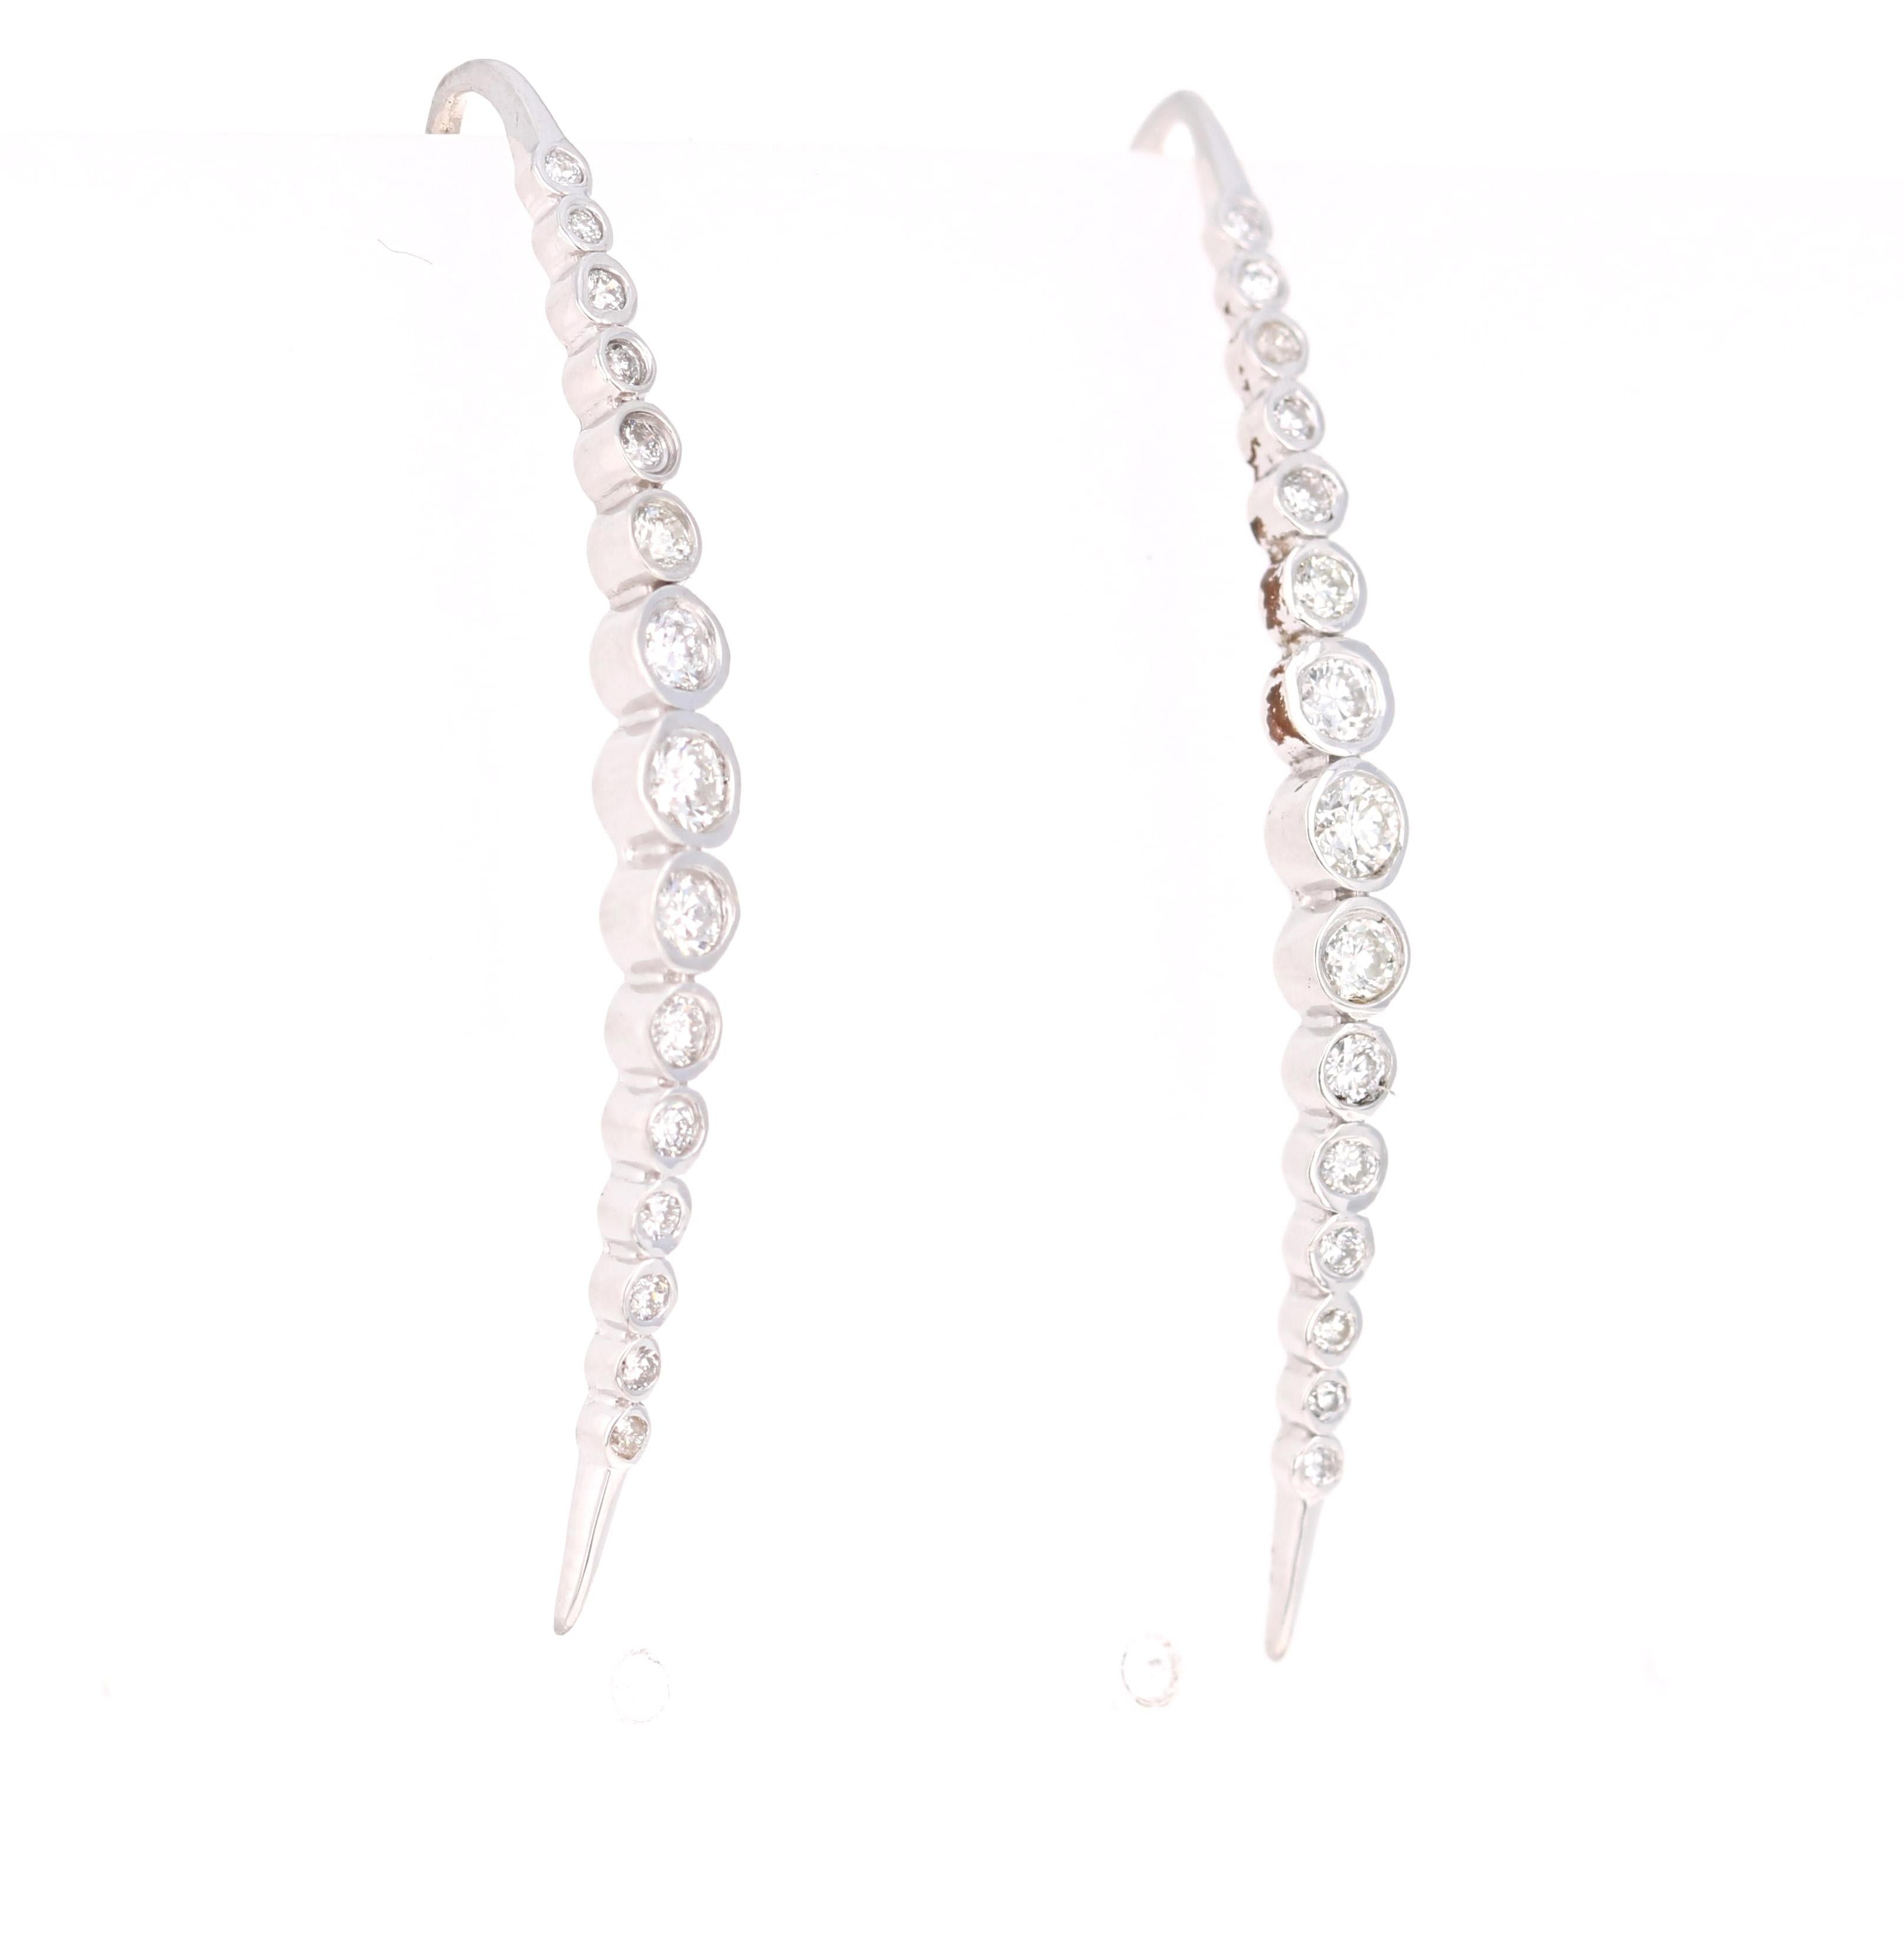 Delicate and Darling Diamond Dazzlers!
These beauties can be worn formally or even casually. 
30 Round Cut Diamonds weighing 0.52 Carats
14 Karat White Gold, 2.3 grams 

The backing of the Earrings is a wire style backing for easy use and